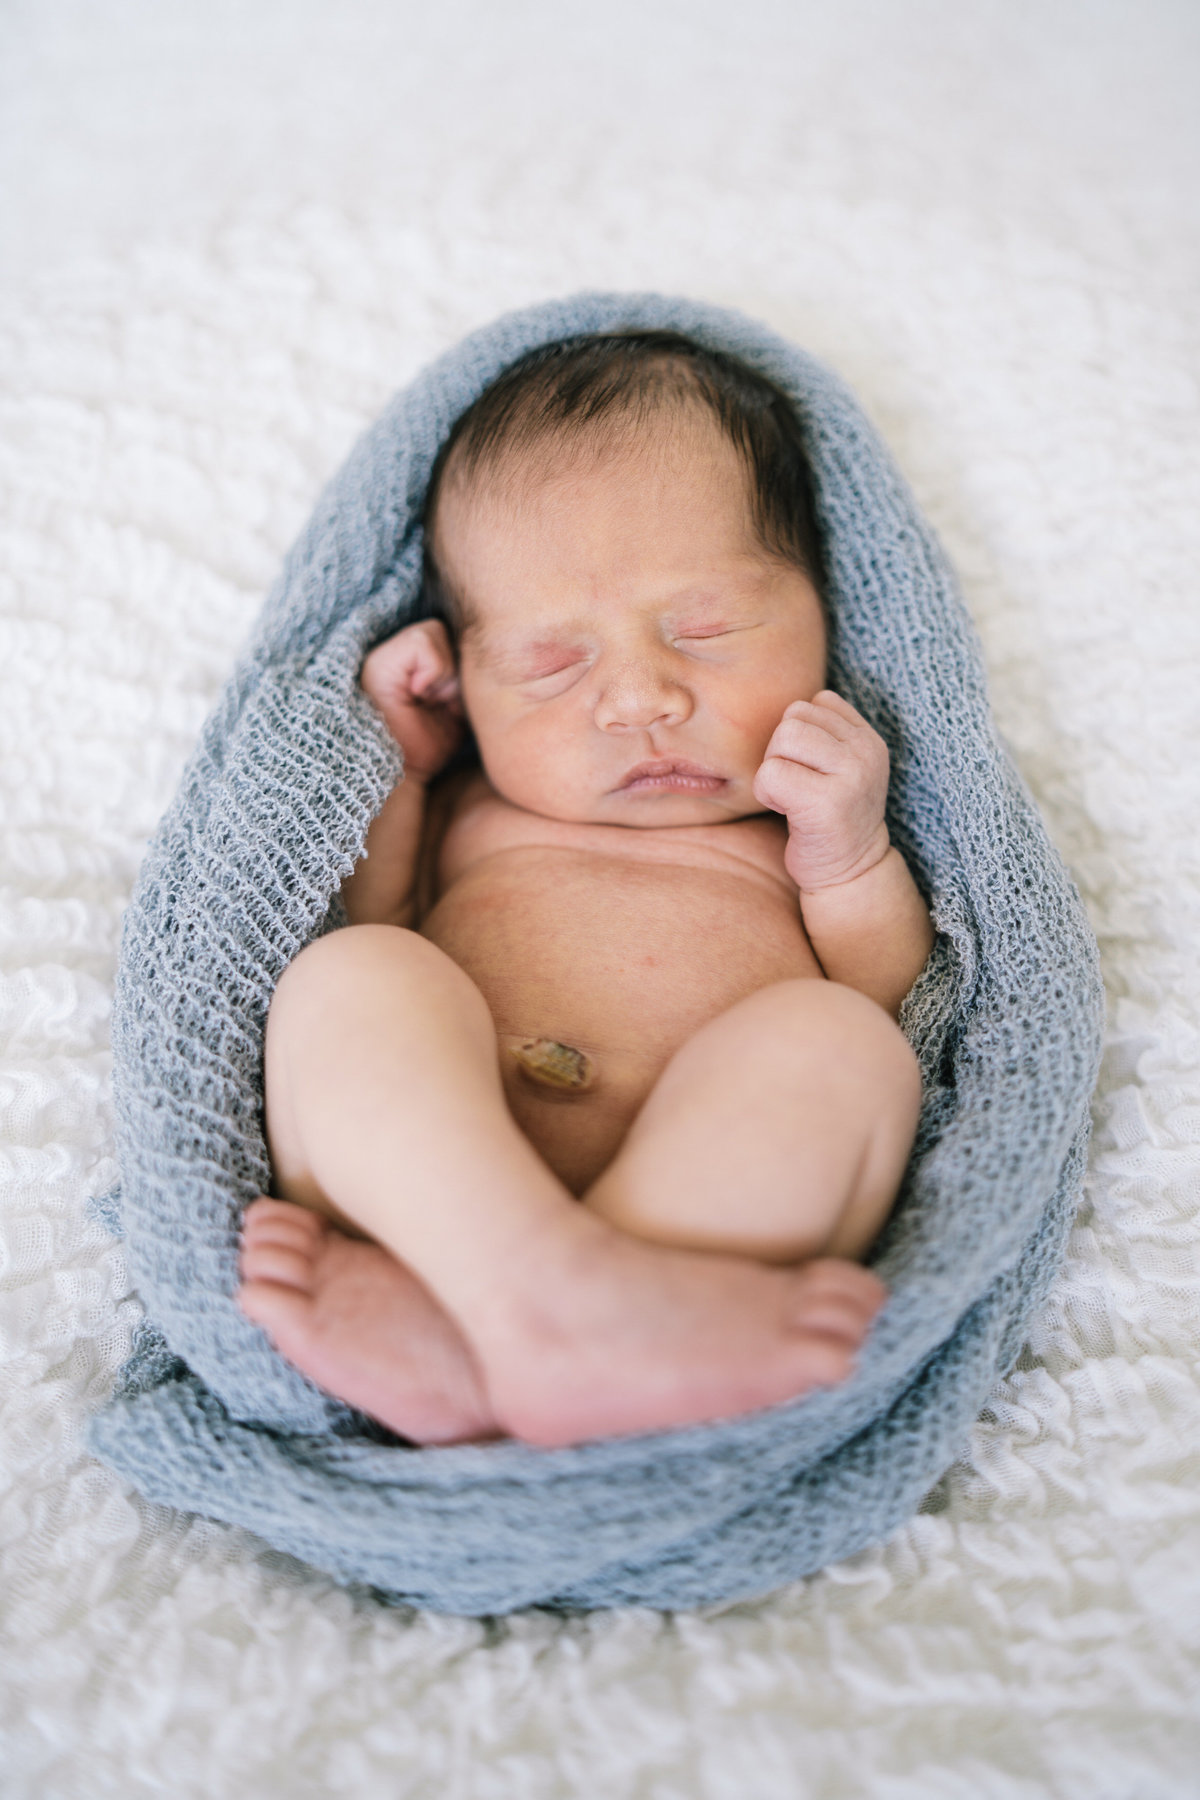 Newborn wrapped in cloth and laying on white blanket in a San Antonio Photography studio.